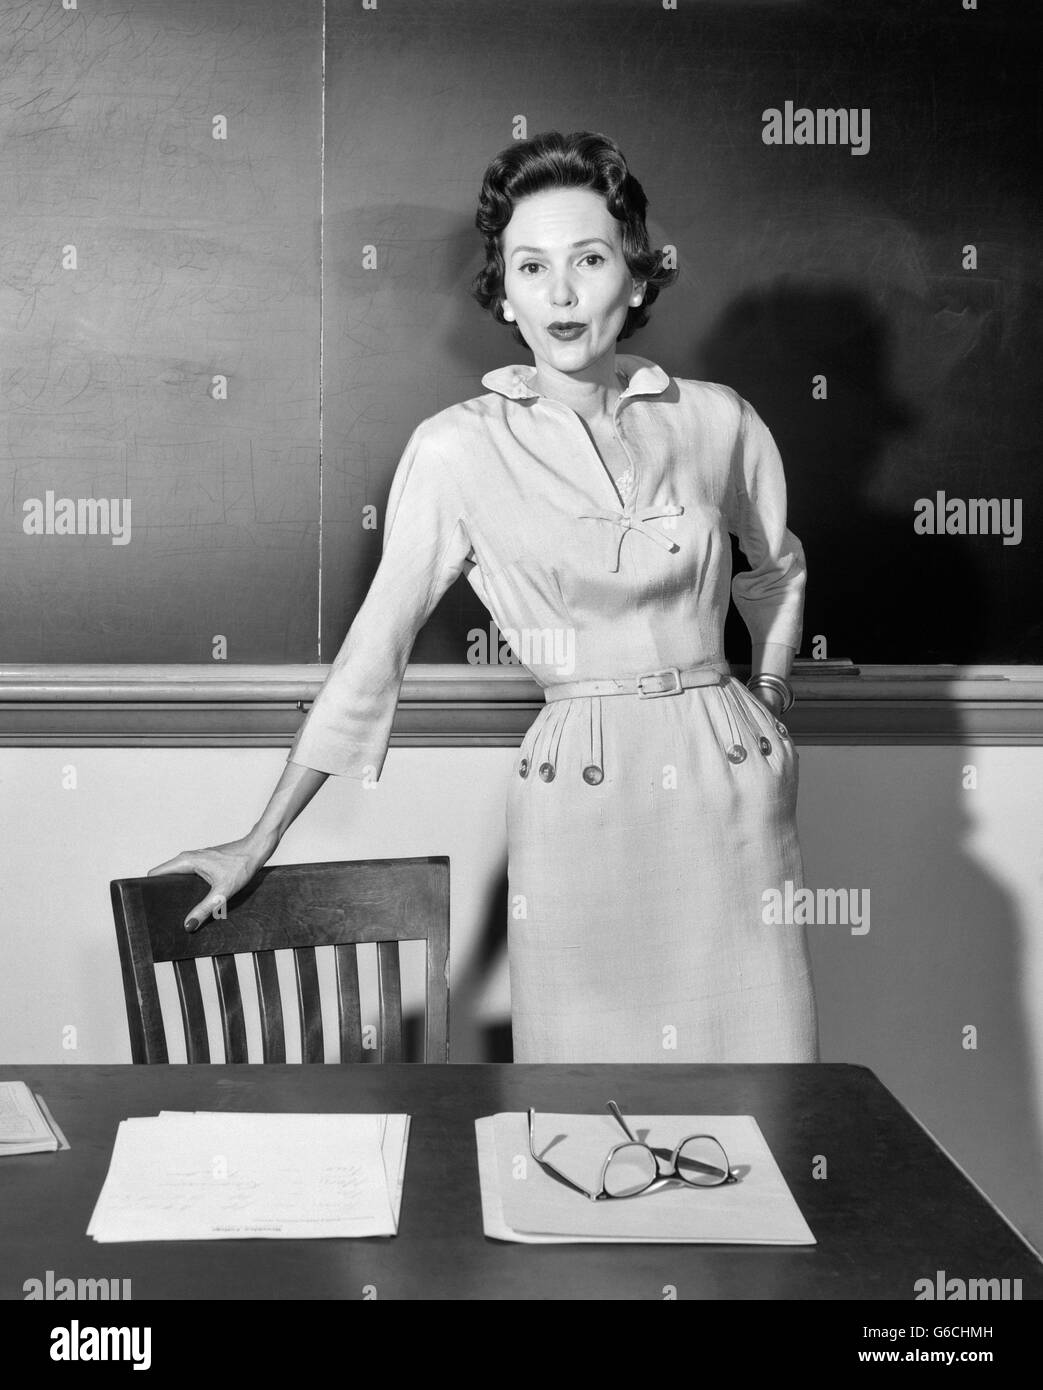 1950s WOMAN SCHOOL TEACHER LOOKING AT CAMERA STANDING IN FRONT OF CHALKBOARD IN CLASSROOM LEANING ON CHAIR BY DESK Stock Photo